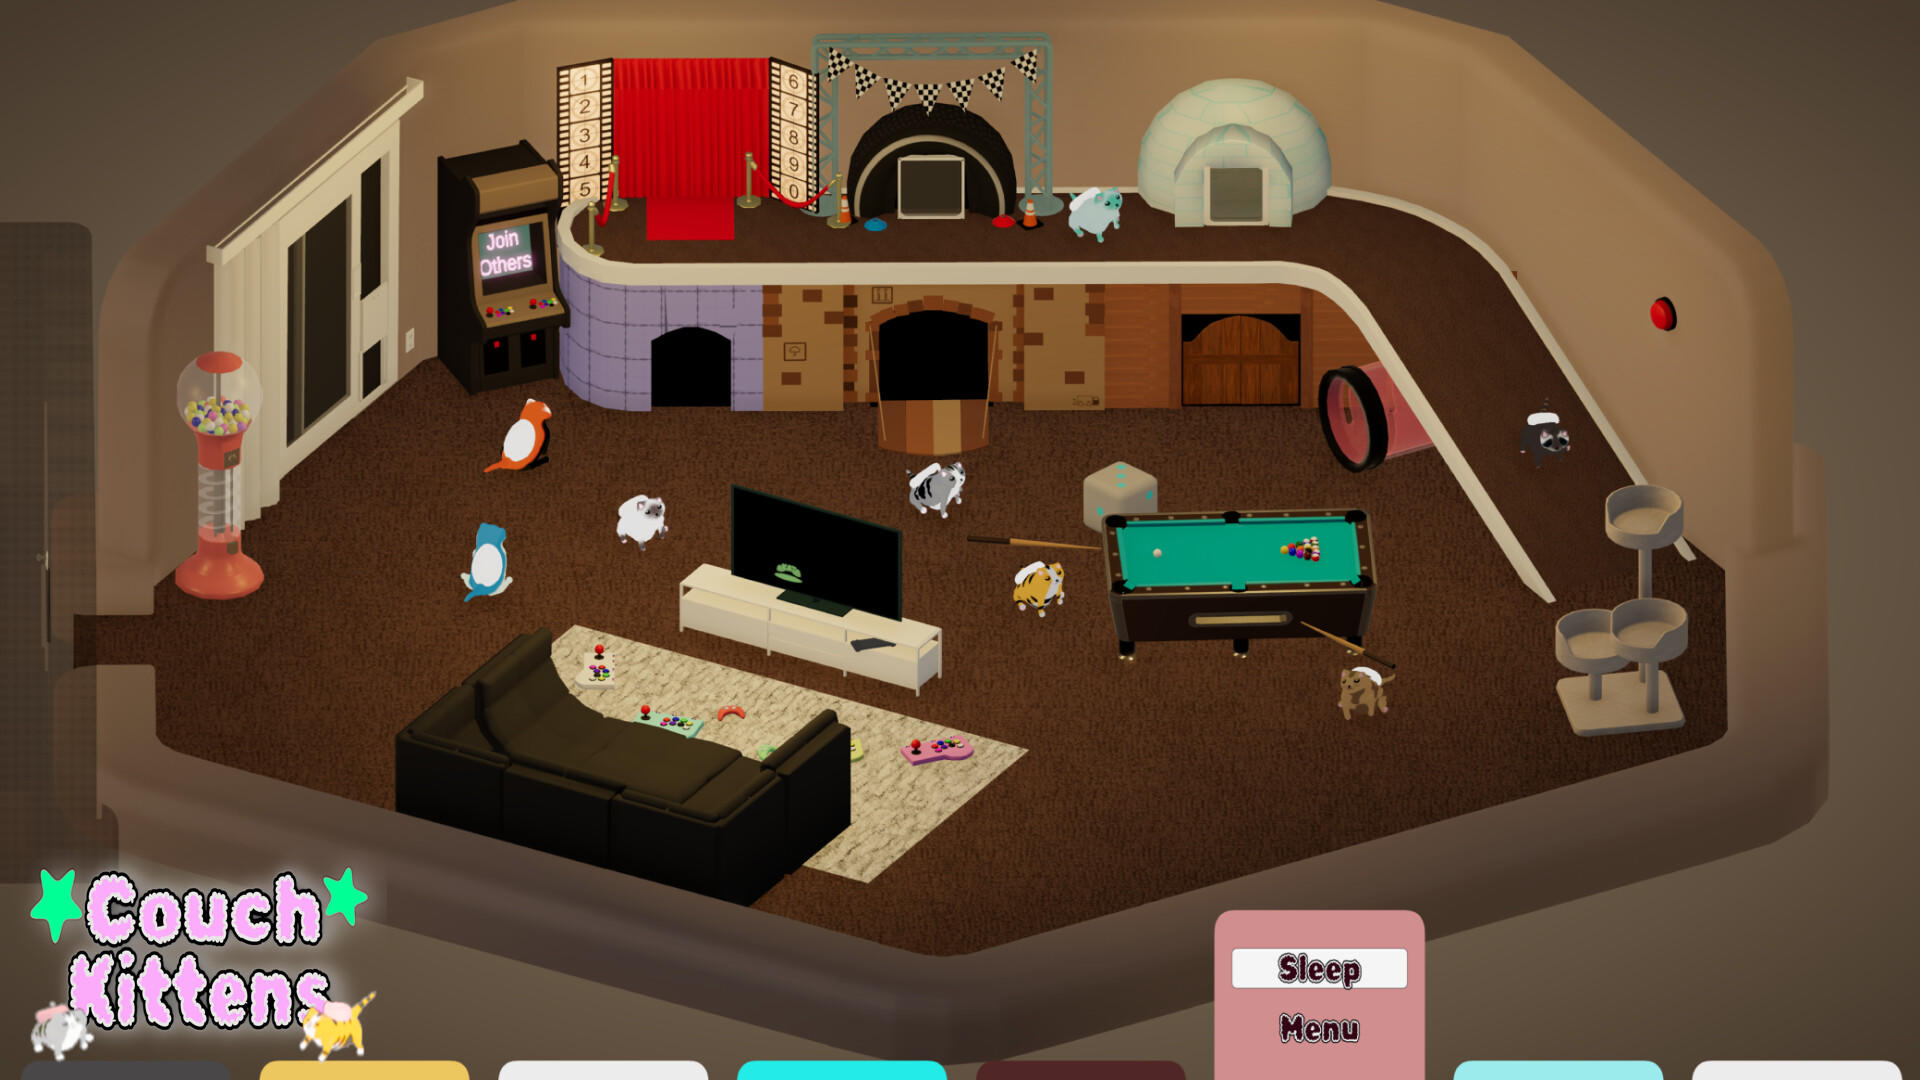 Screenshot 1 of Couch Kittens 